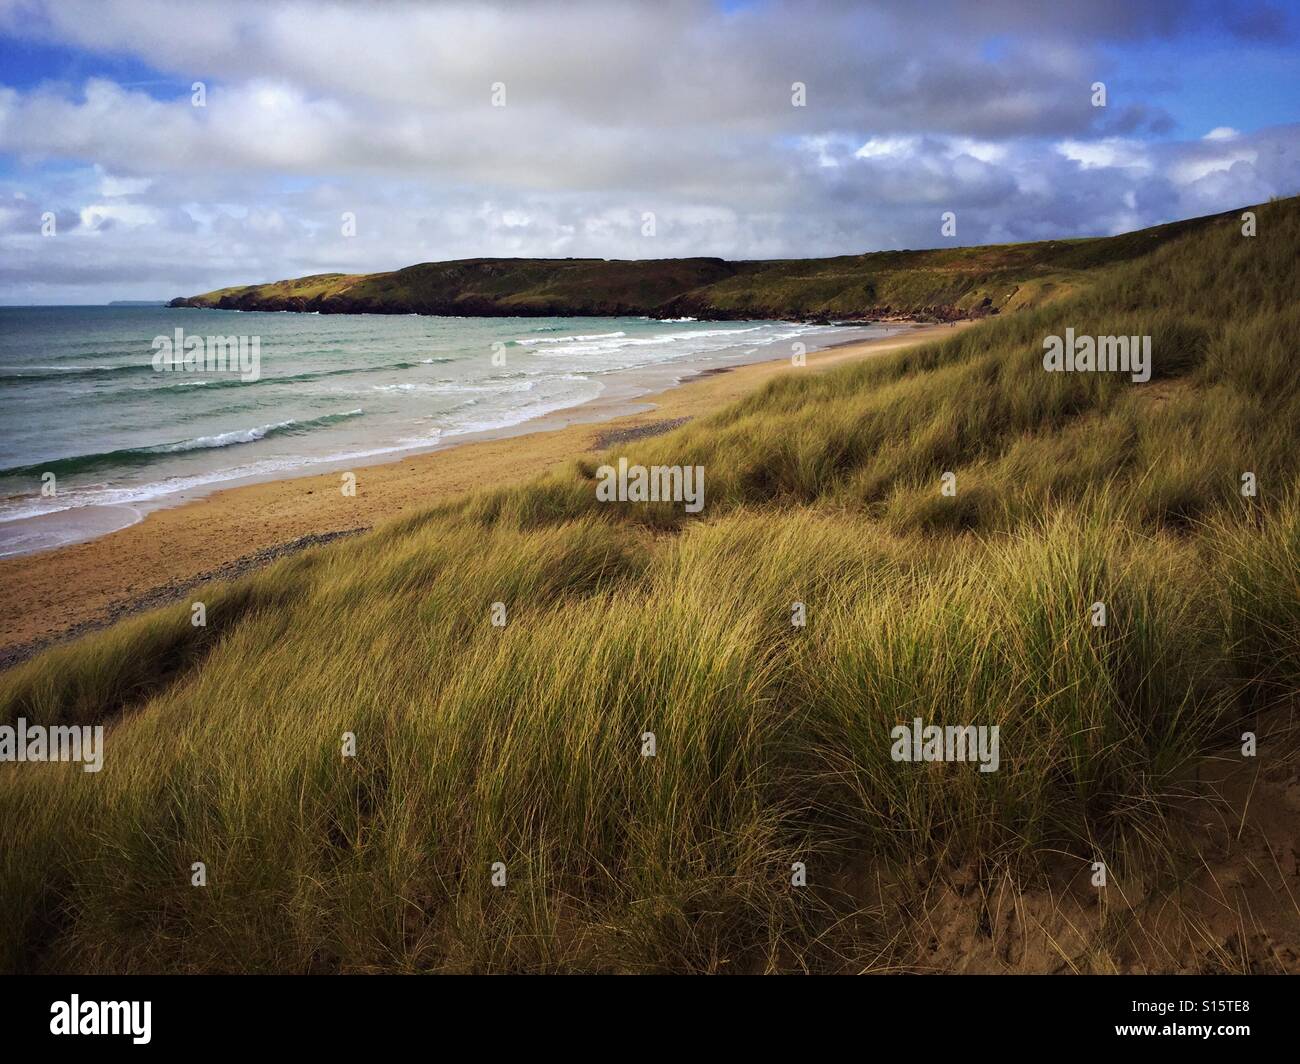 A general view of Freshwater West beach in South Wales October 2016. The beach features in a Harry Potter movie. The location features in the film where Dobby was buried. Stock Photo